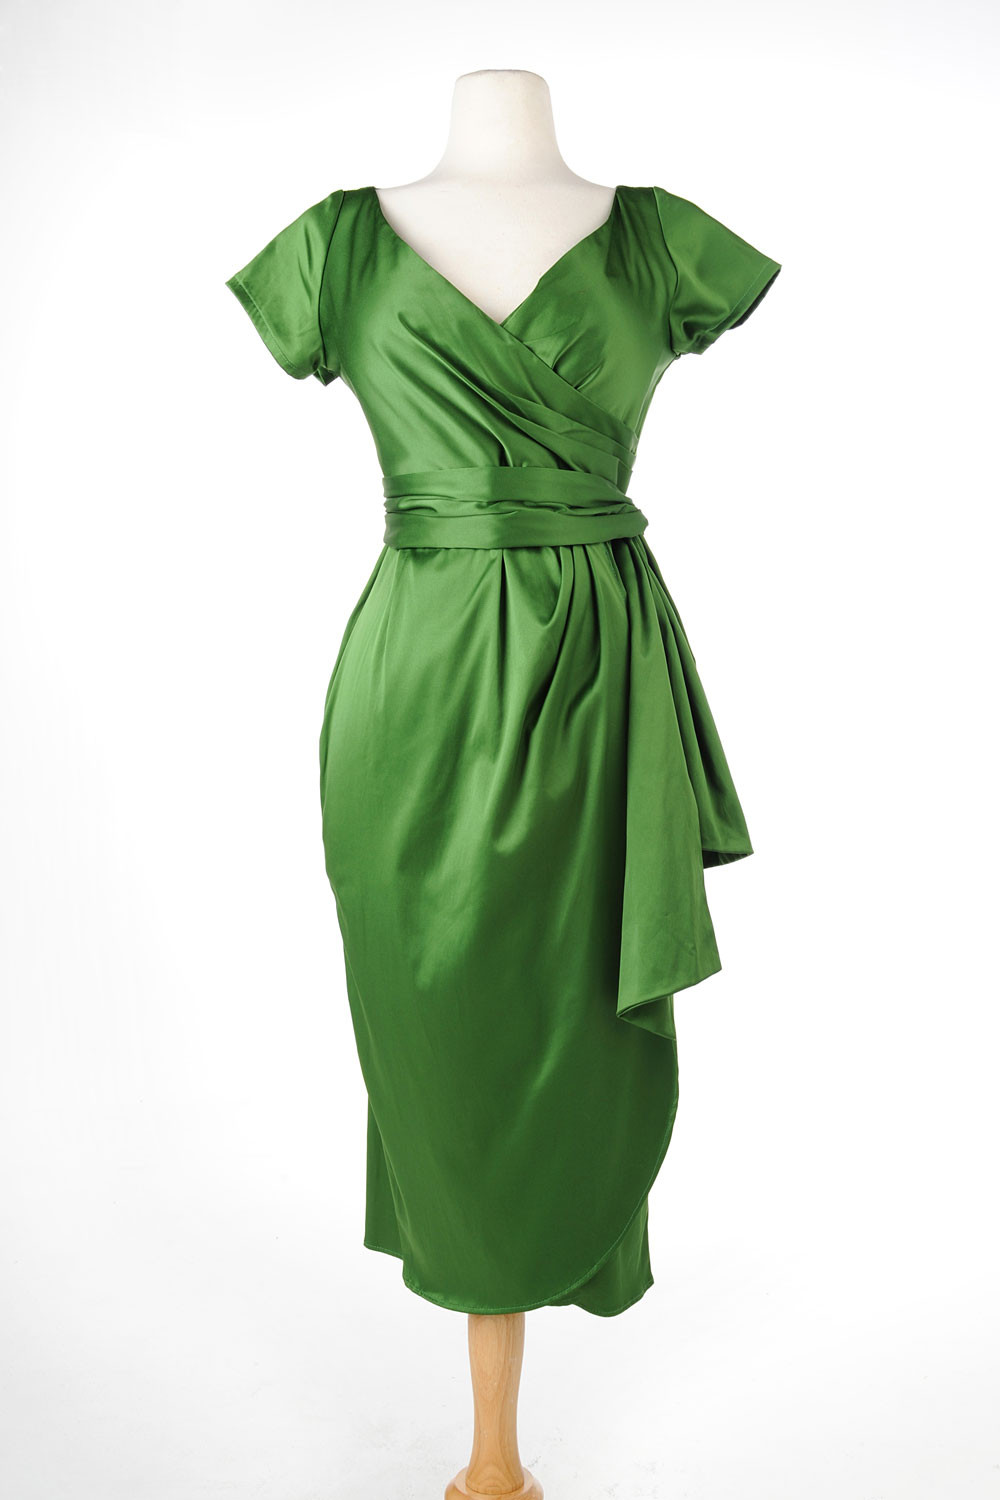 Pinup Couture - Pinup Couture Ava Dress in Green Shakira Satin ...